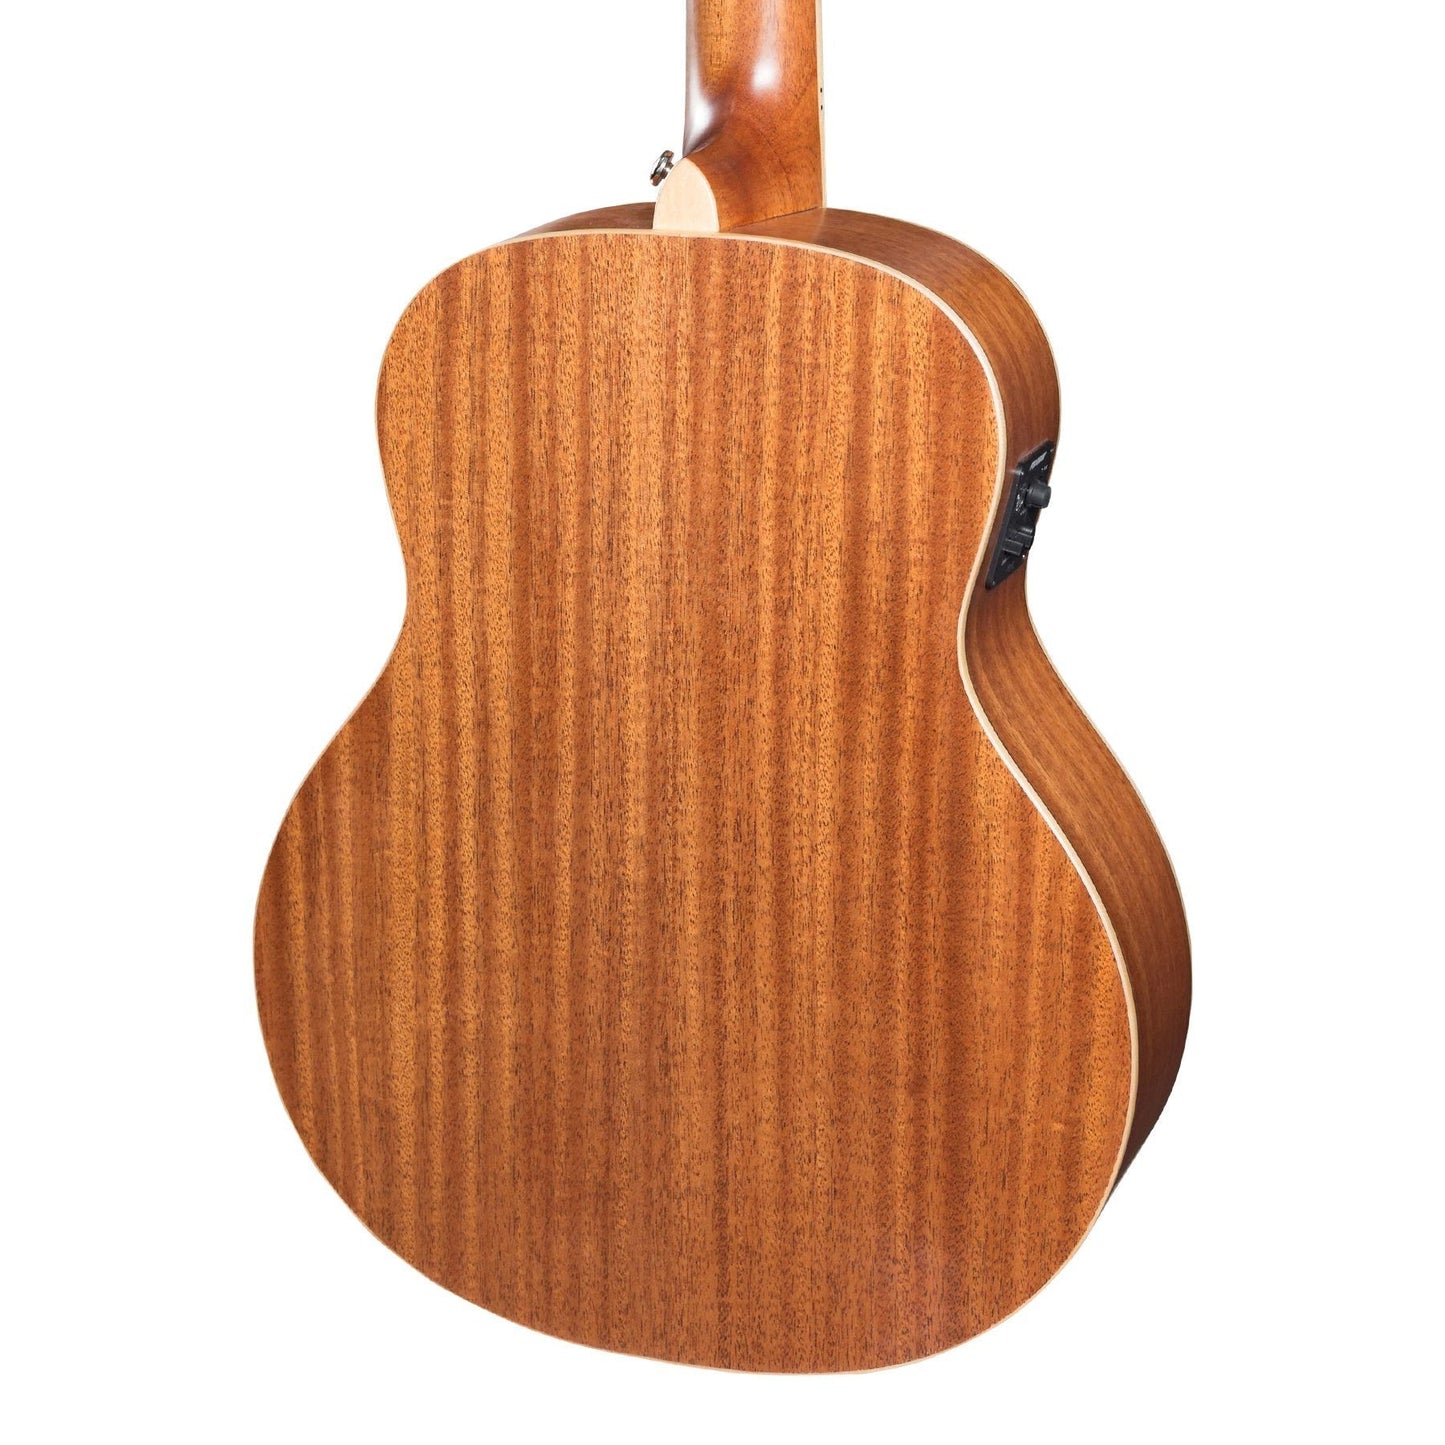 Timberidge '1 Series' 12-String Spruce Solid Top Acoustic-Electric TS-Mini Guitar (Natural Satin)